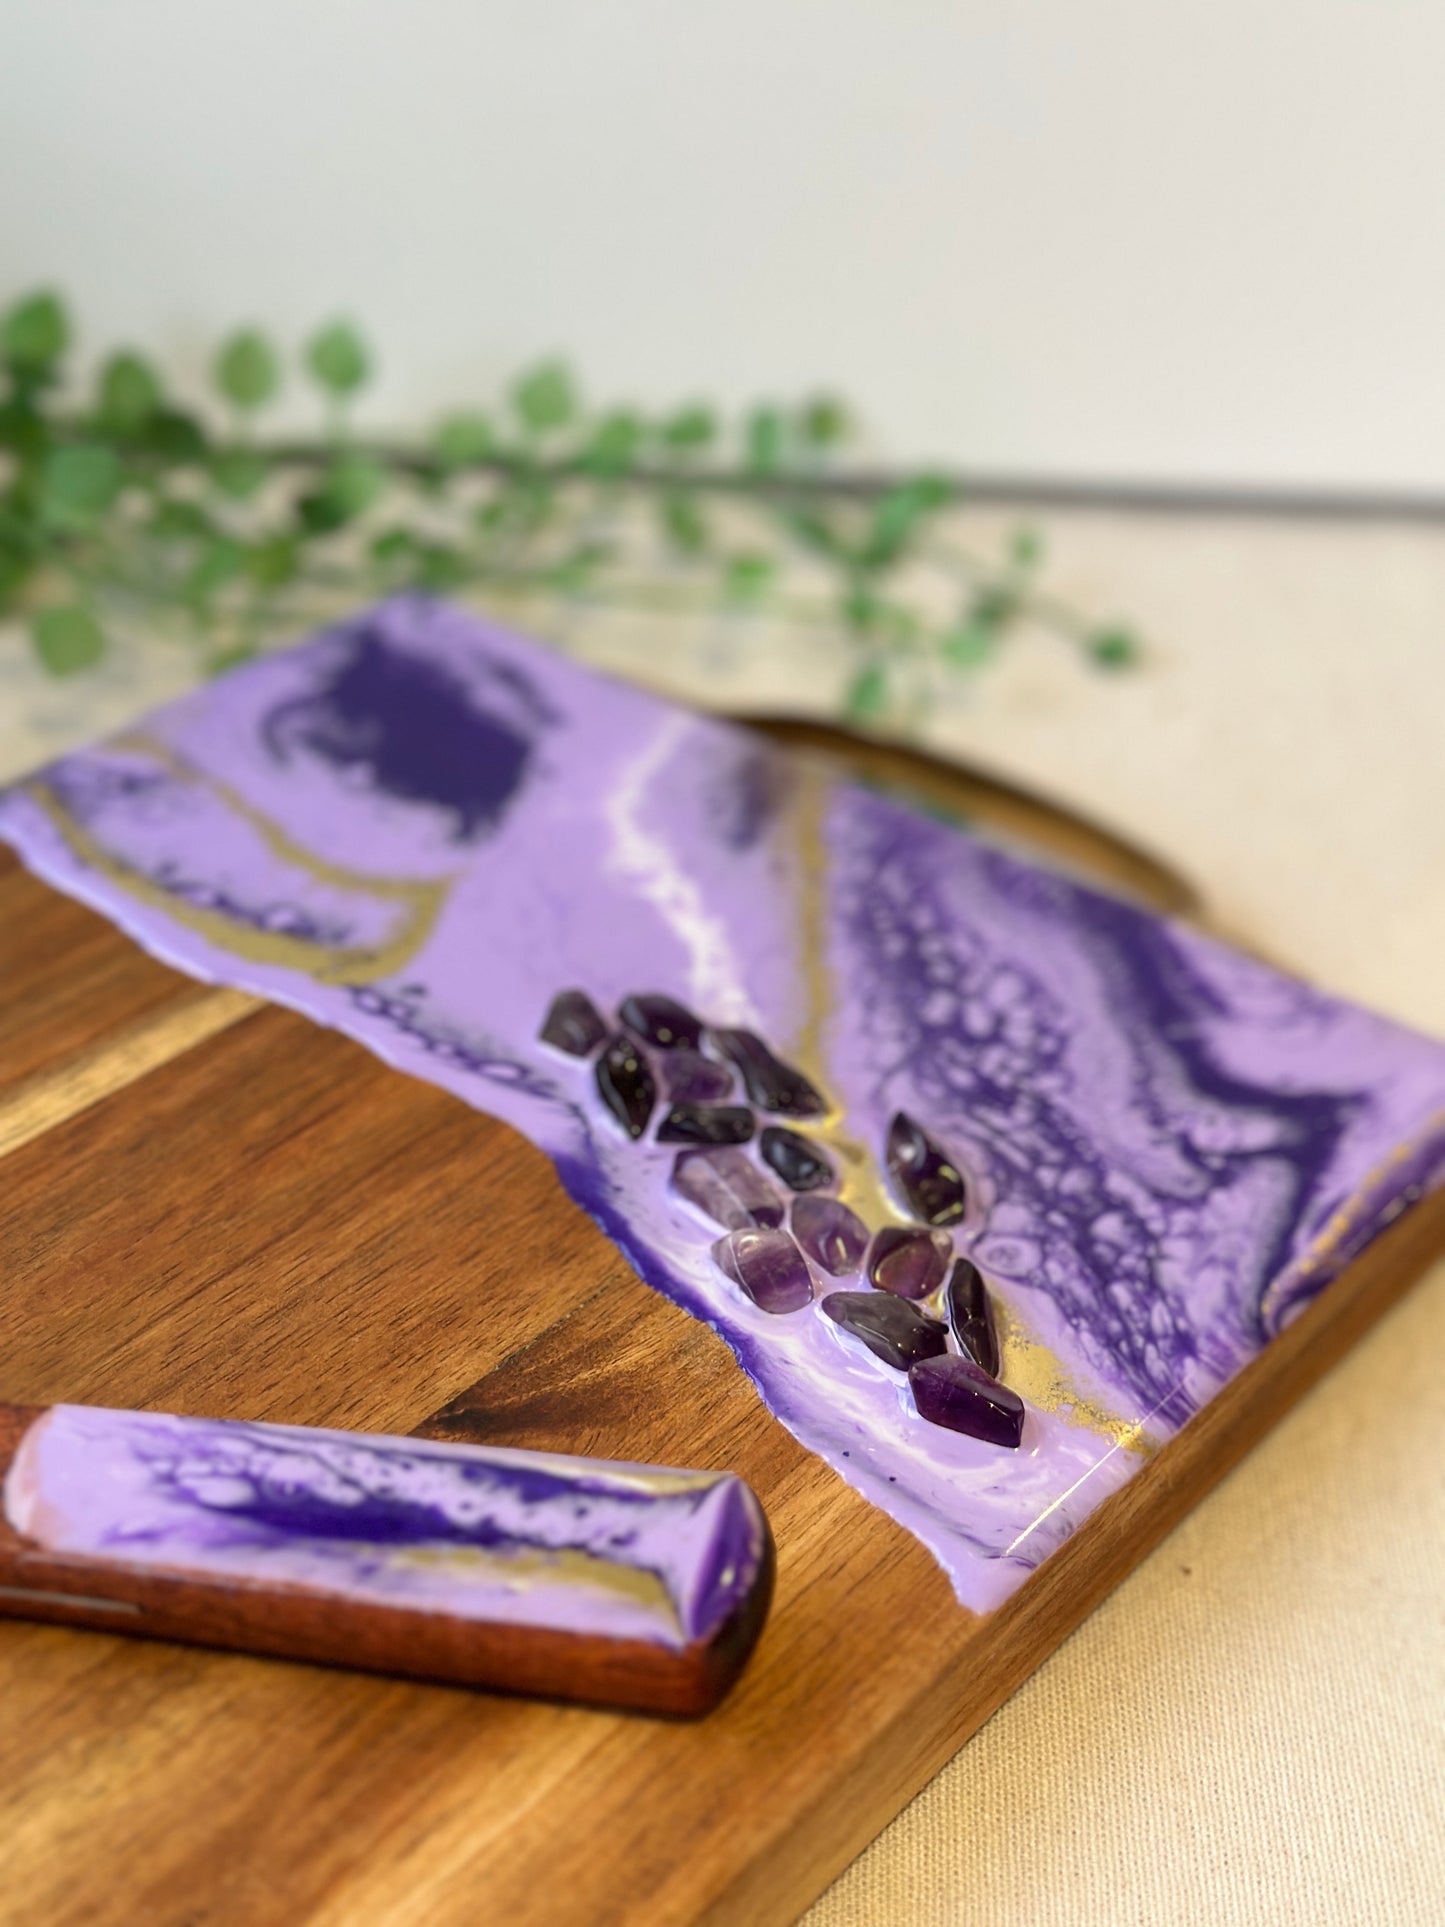 SERVING BOARD - purple resin with real amethyst crystals, serving board with matching knife